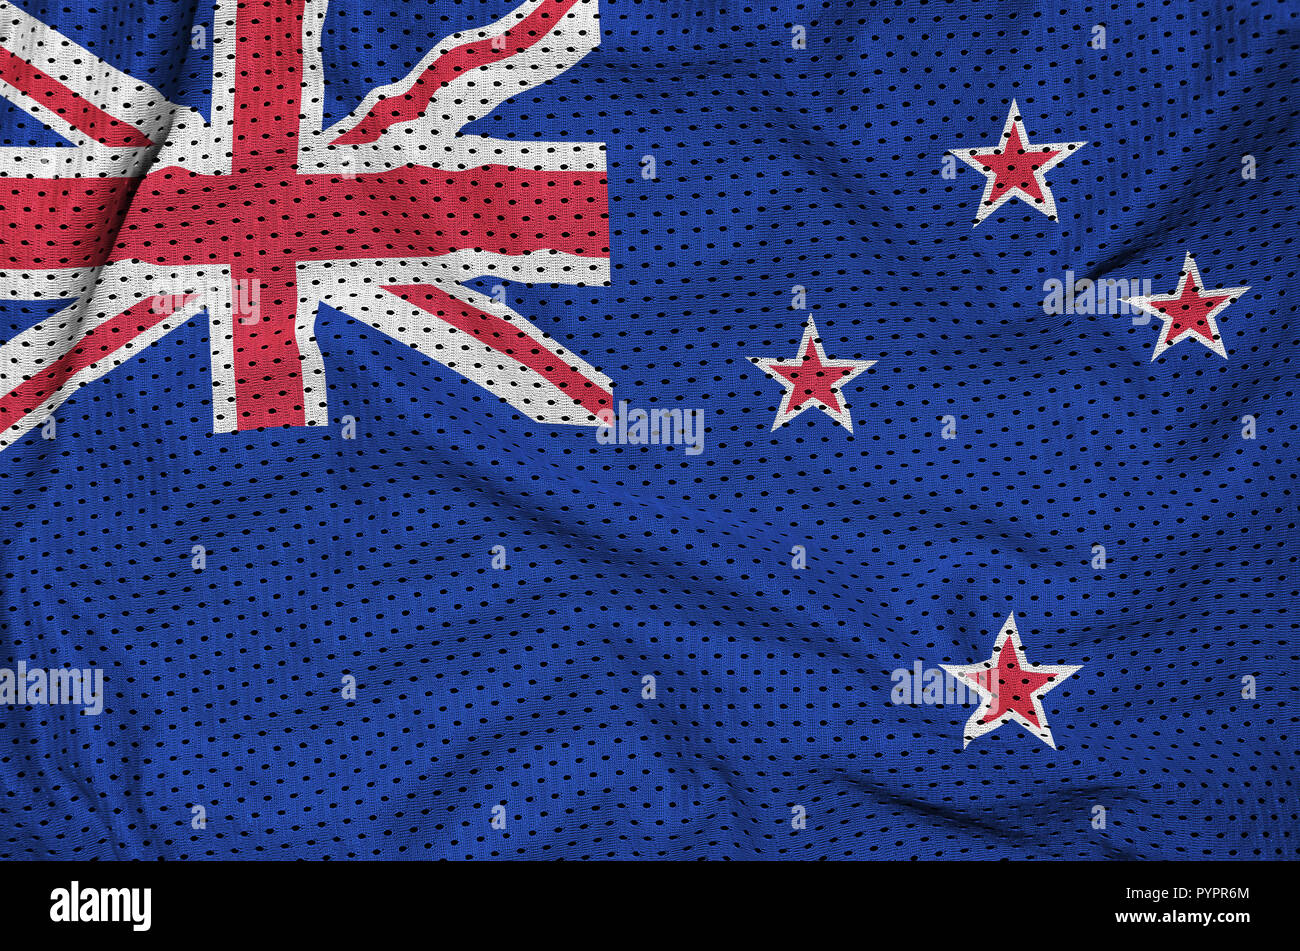 New Zealand flag printed on a polyester nylon sportswear mesh fabric with some folds Stock Photo